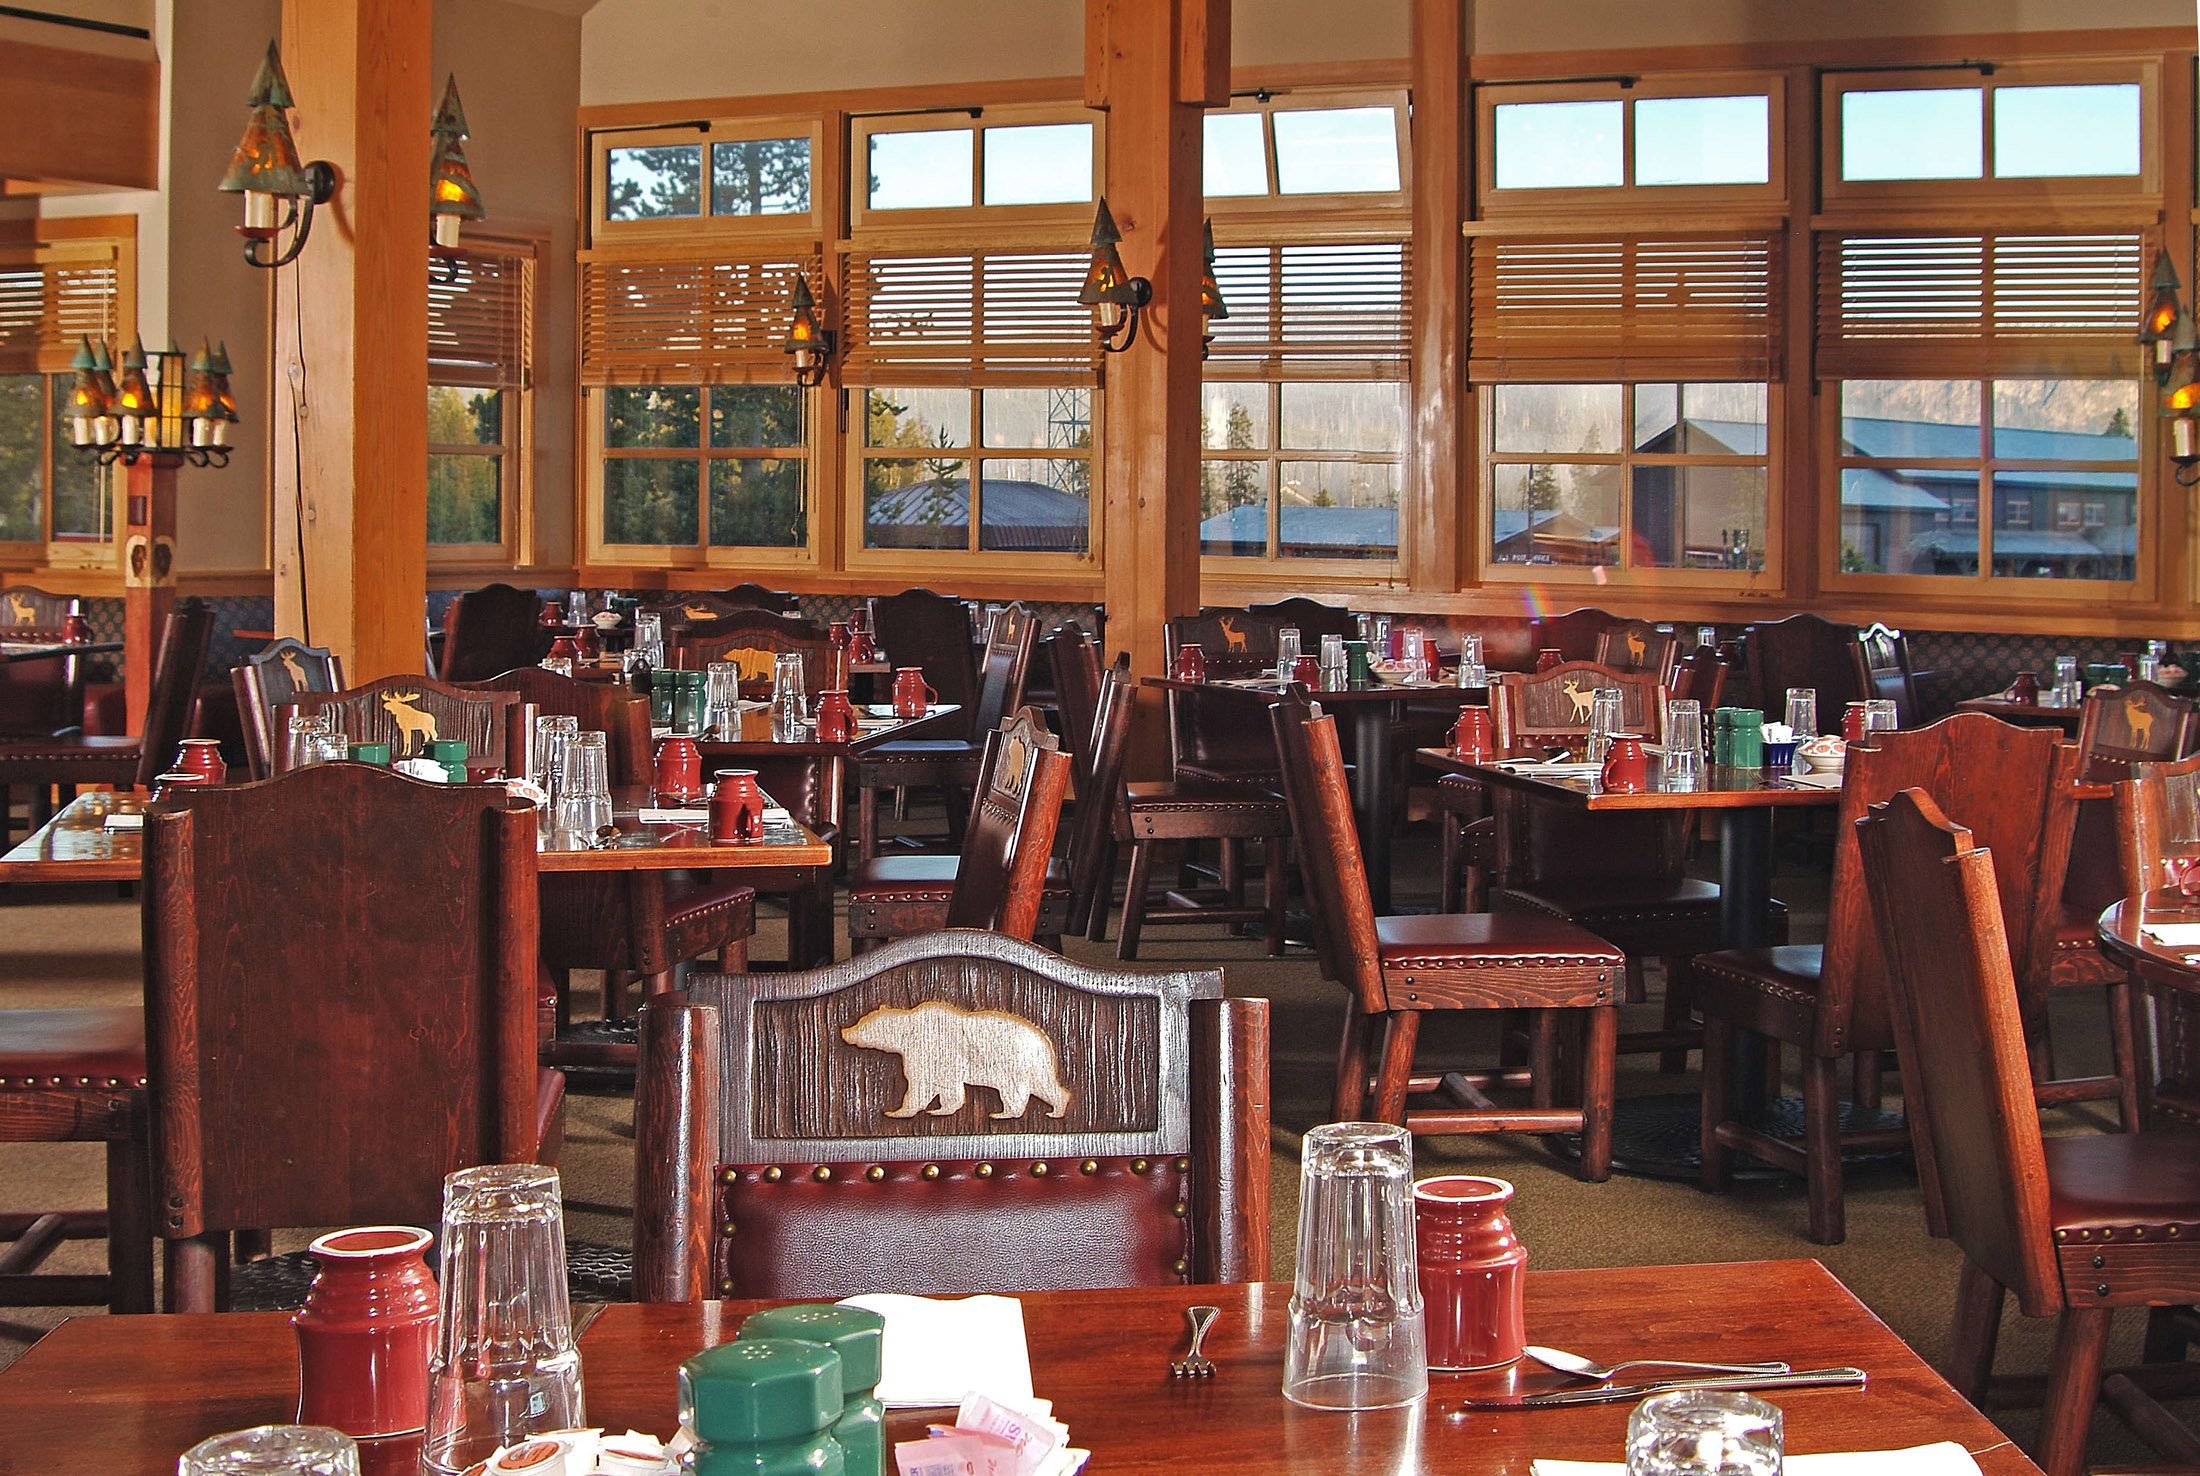 Old Faithful Inn Dining Room Menu Picture Of Old Faithful Inn Dining Room Within The